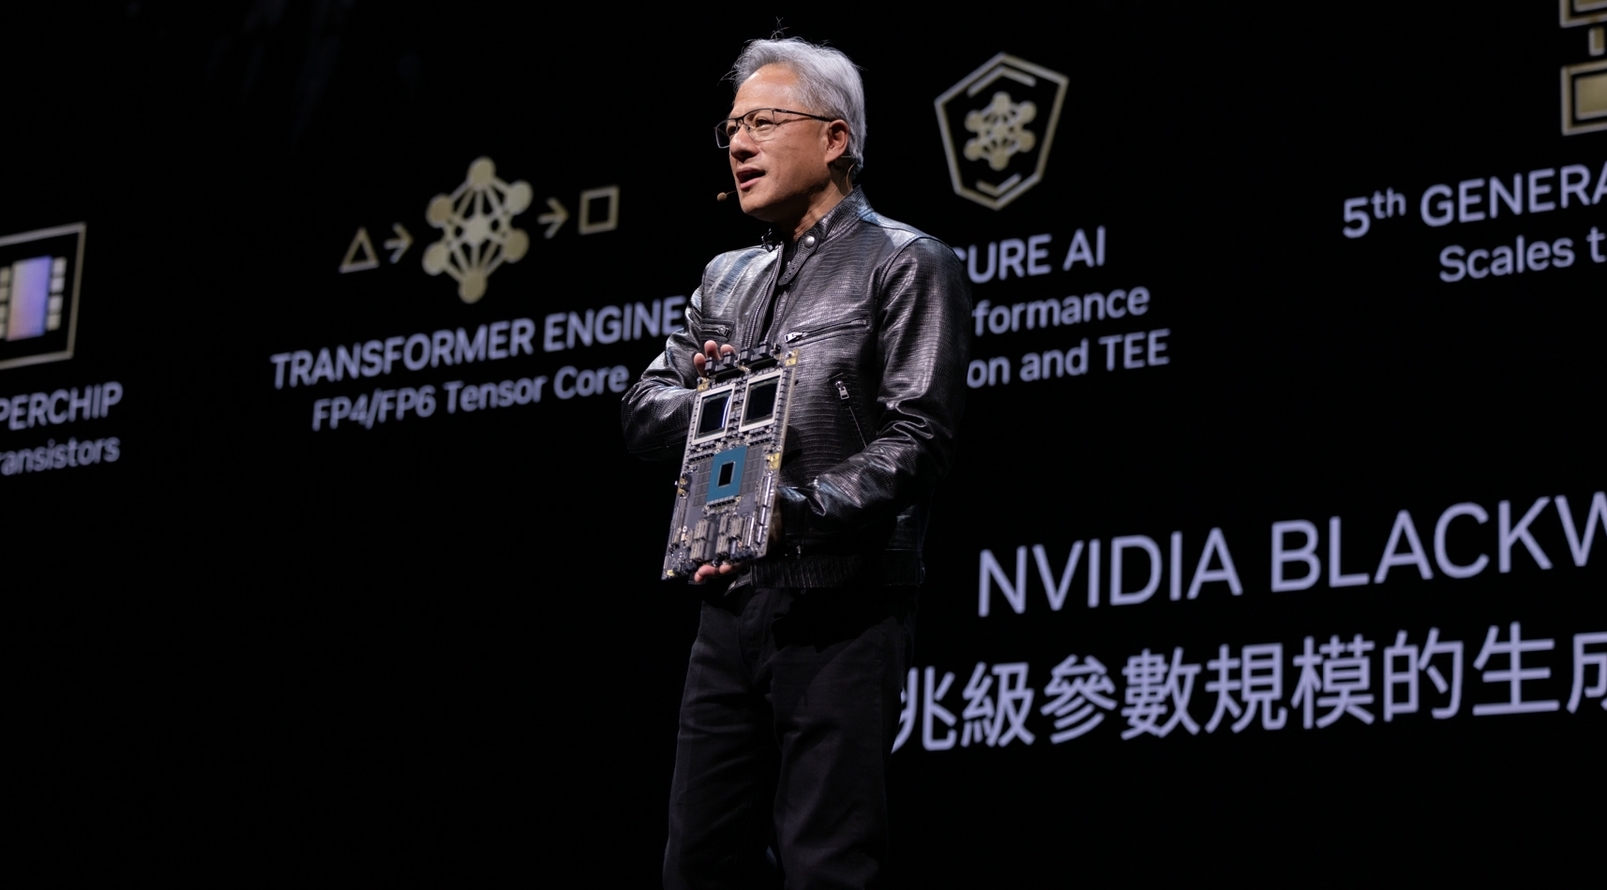  Nvidia becomes the world's most valuable company, but will somebody please think about poor old PC gamers?  